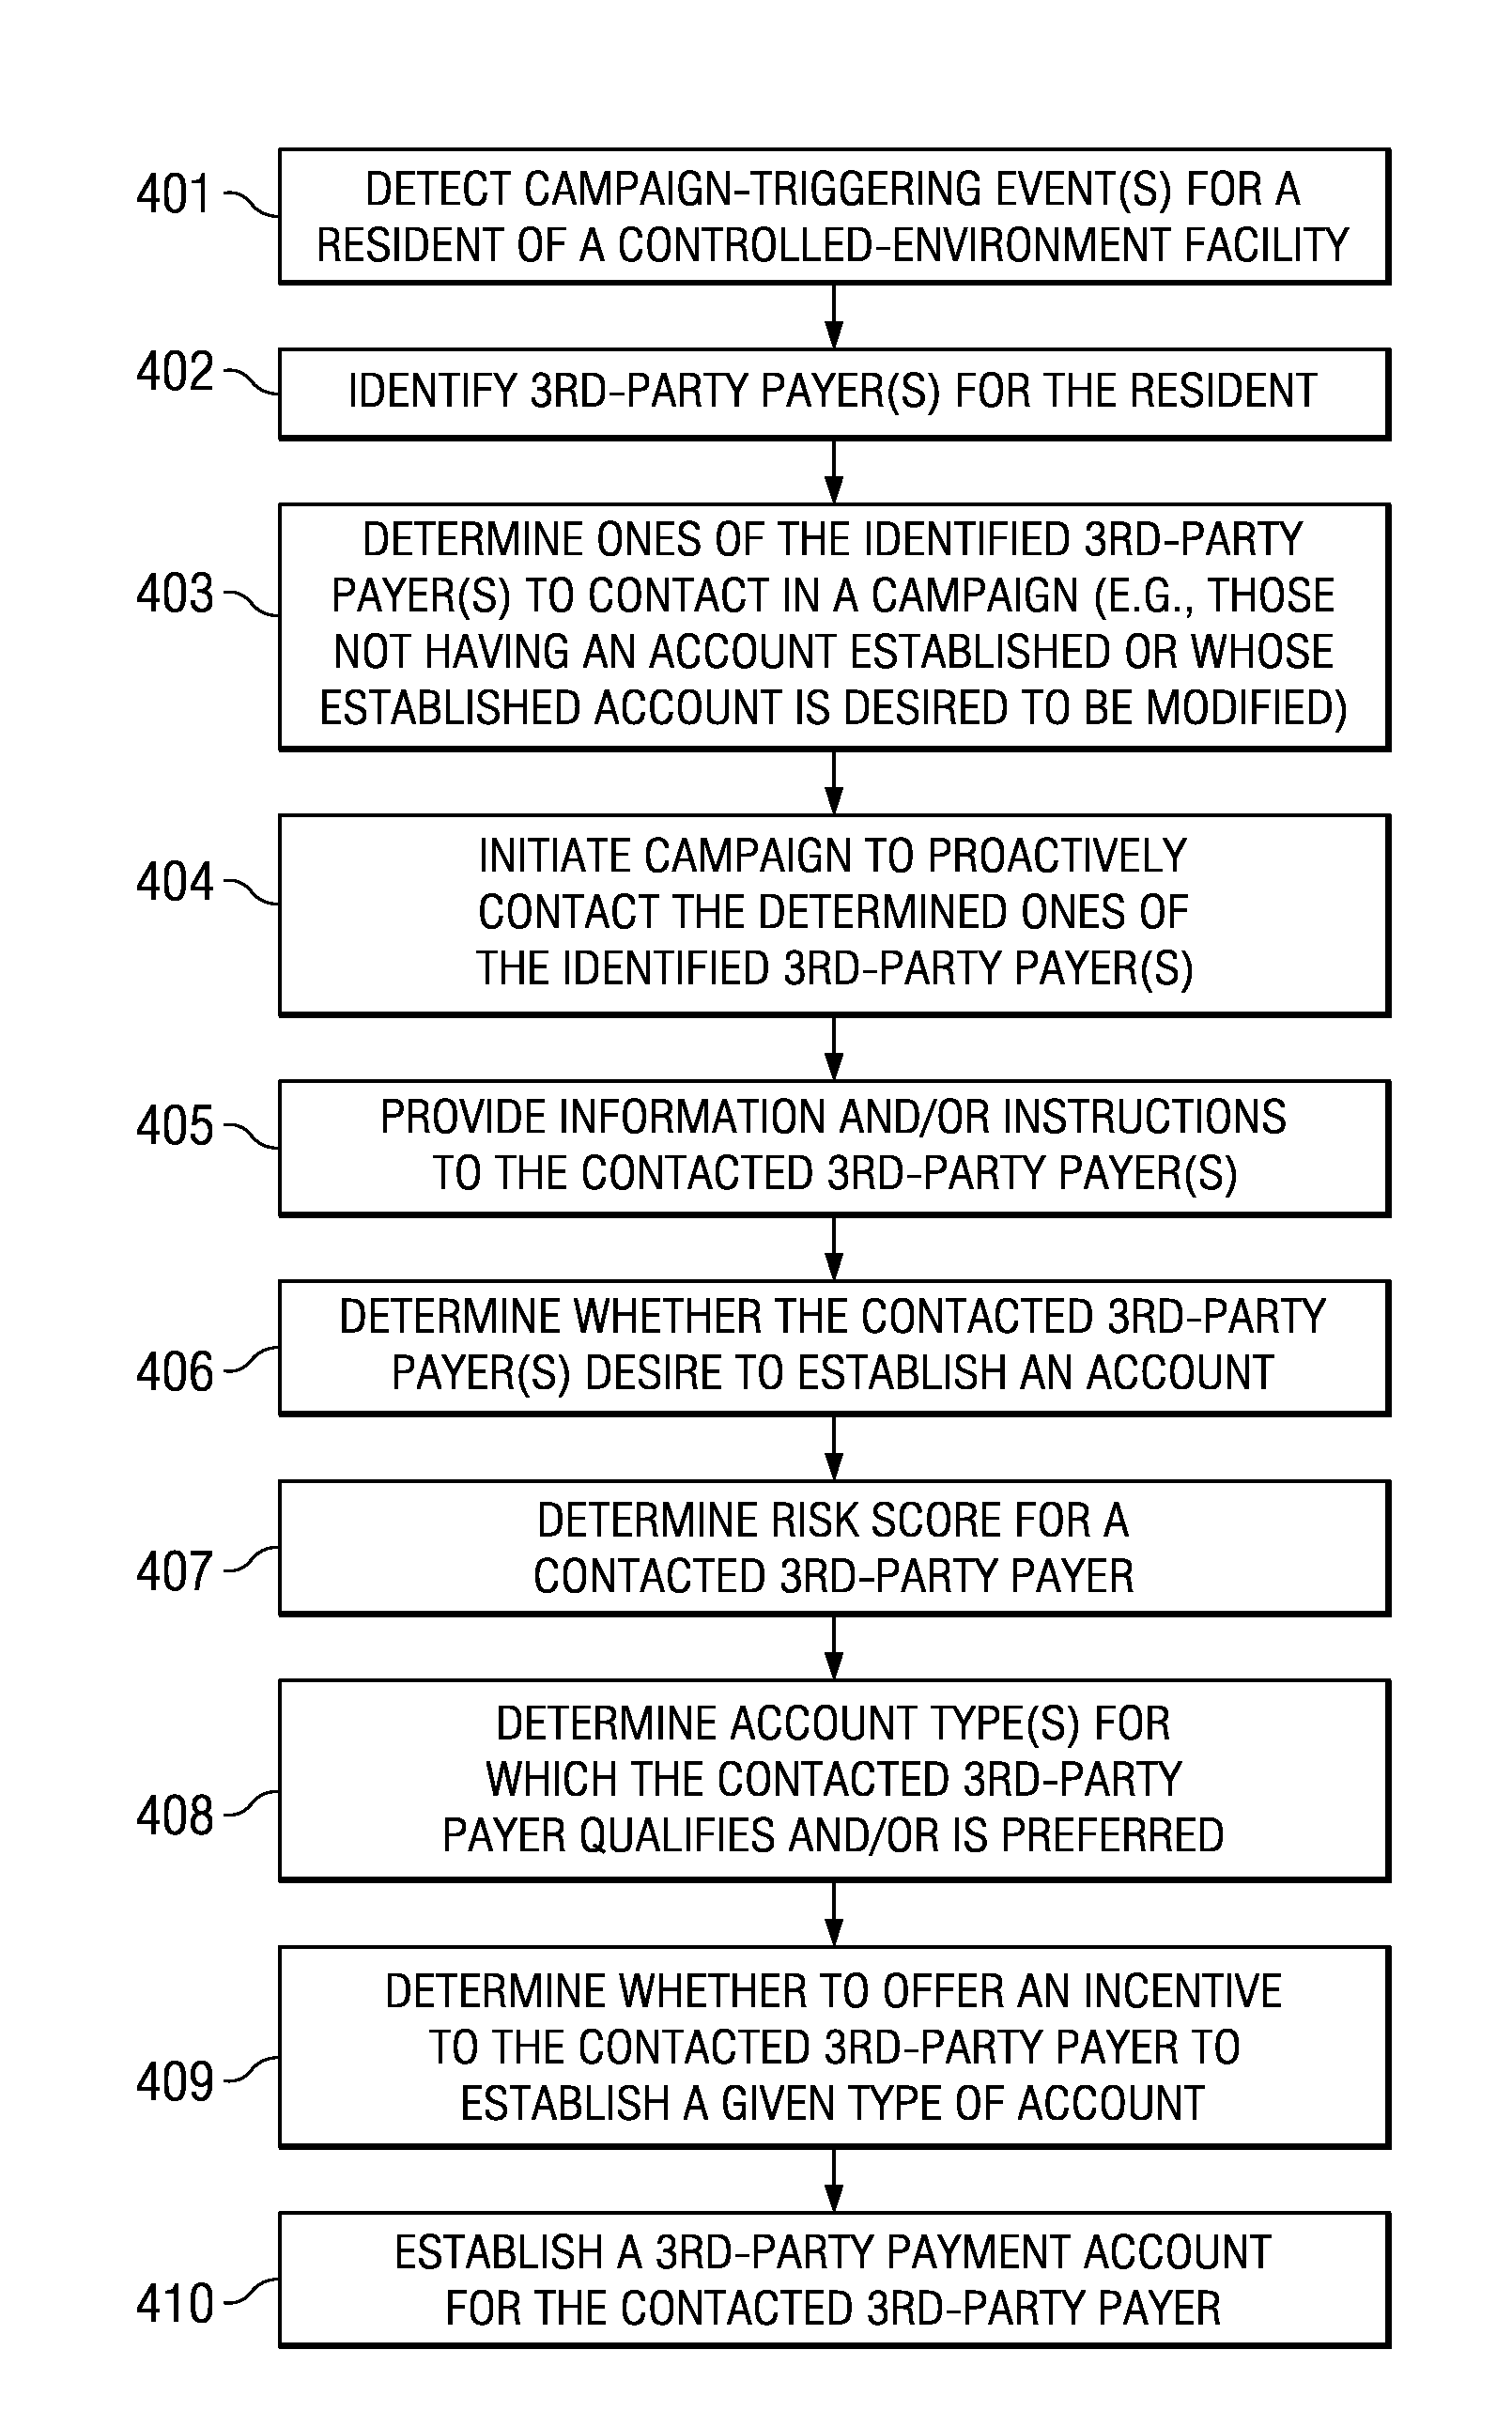 System and method for proactively establishing a third-party payment account for services rendered to a resident of a controlled-environment facility